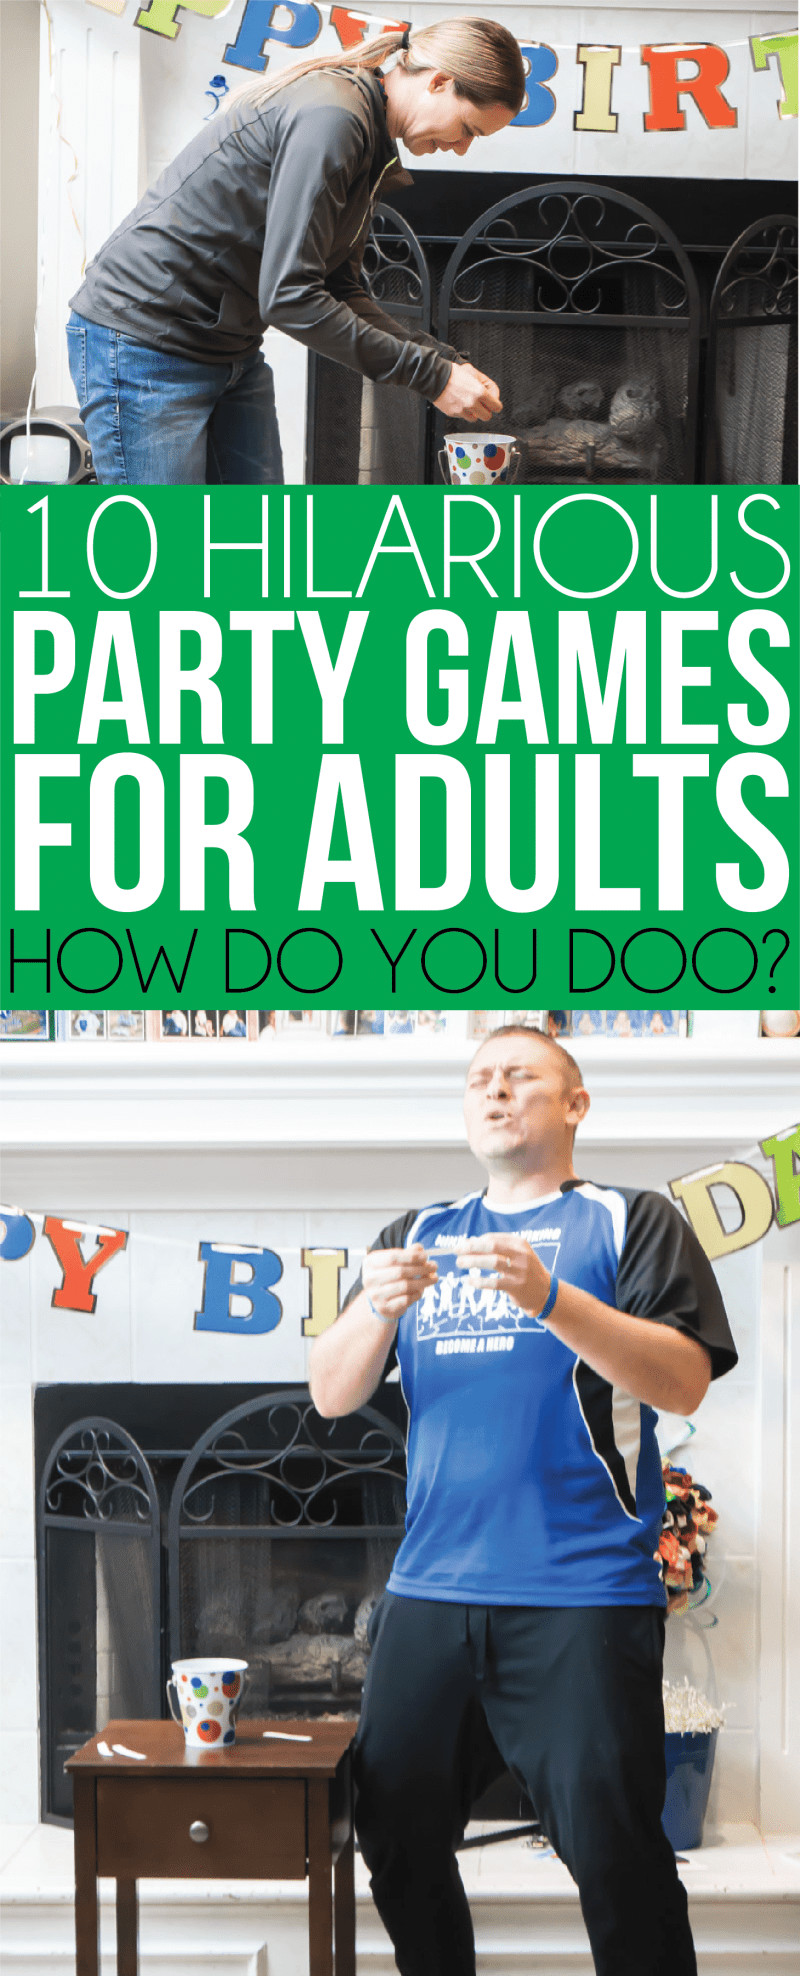 Adult Games For Birthday Party
 10 Hilarious Party Games for Adults that You ve Probably